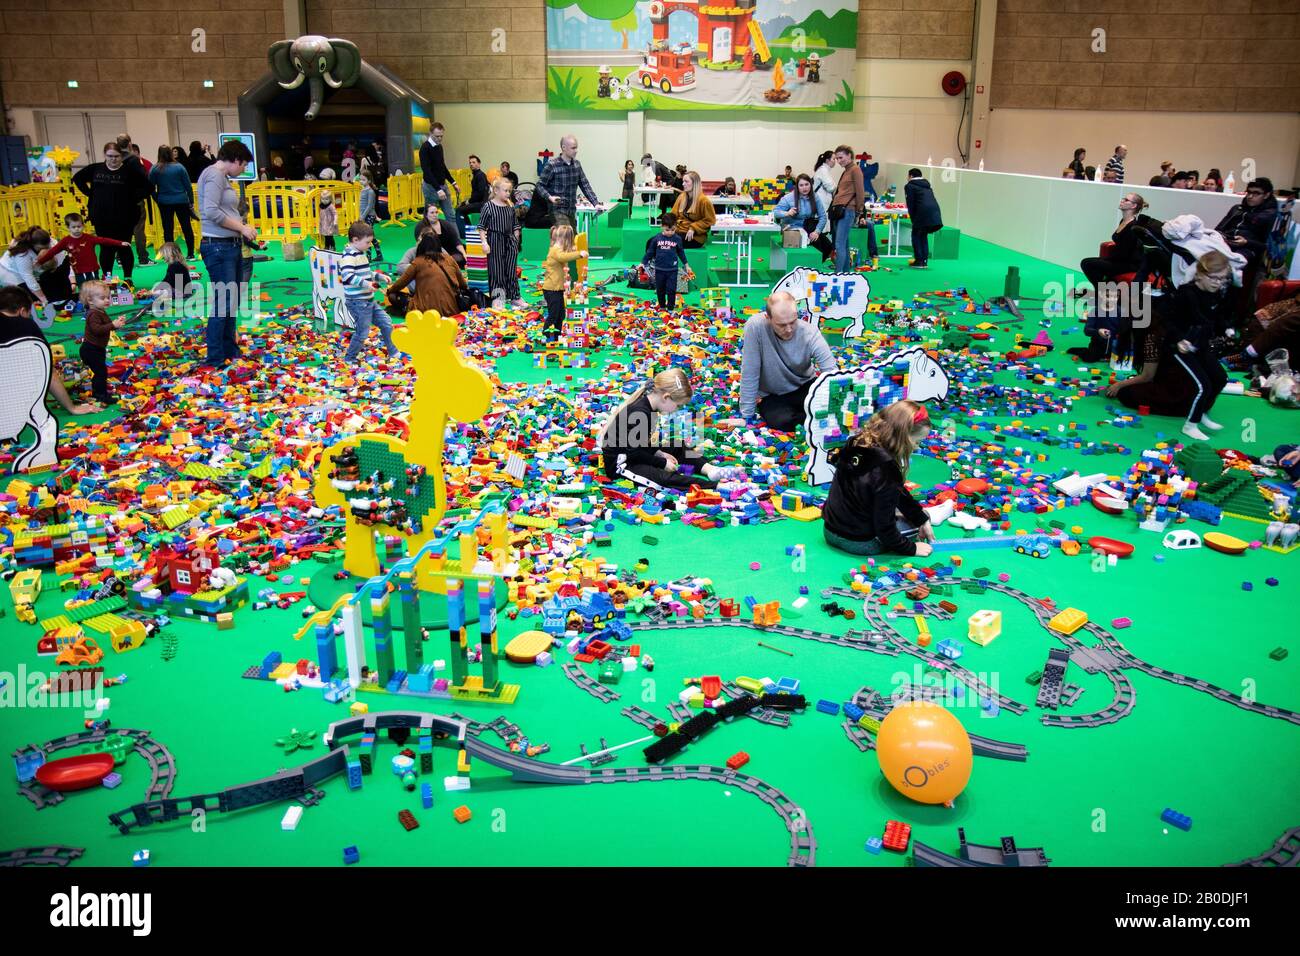 Copenhagen, Denmark. 13th Feb, 2017. Children and adults of all ages go  crazy at the annual LEGO World event in Bella Center Copenhagen. The LEGO  Group is the largest toy company by